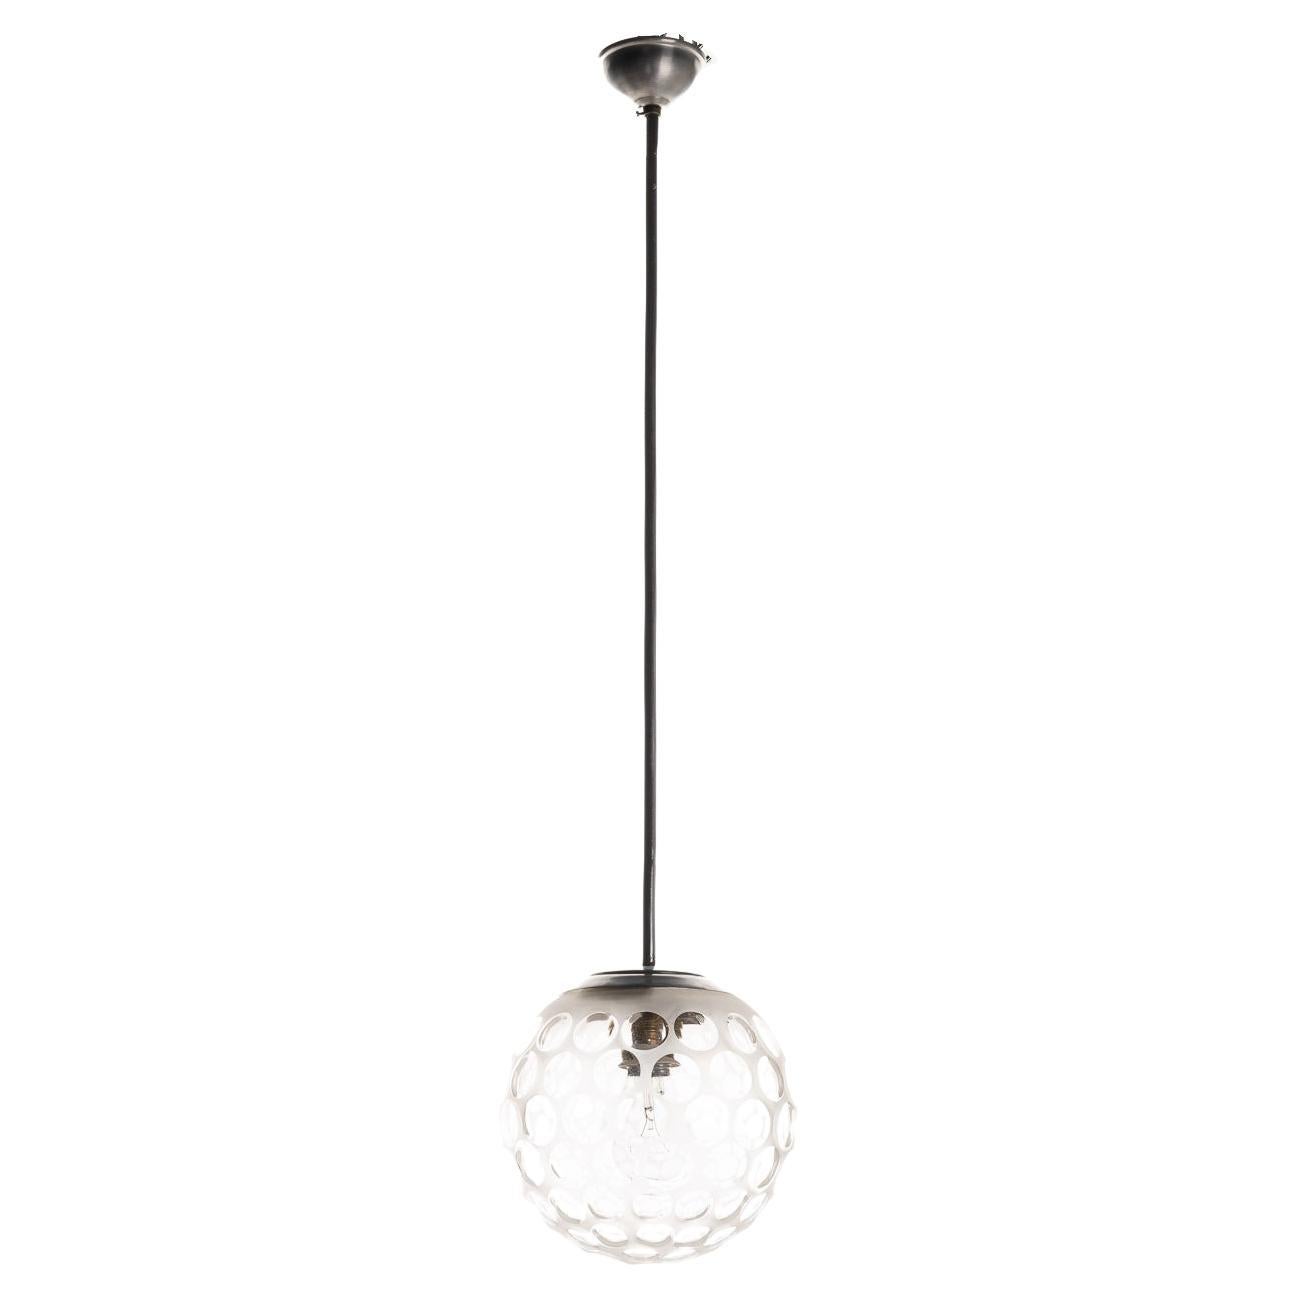 1940's Murano Glass and Metal Pendant Attributed to Lenti by Carlo scarpa For Sale